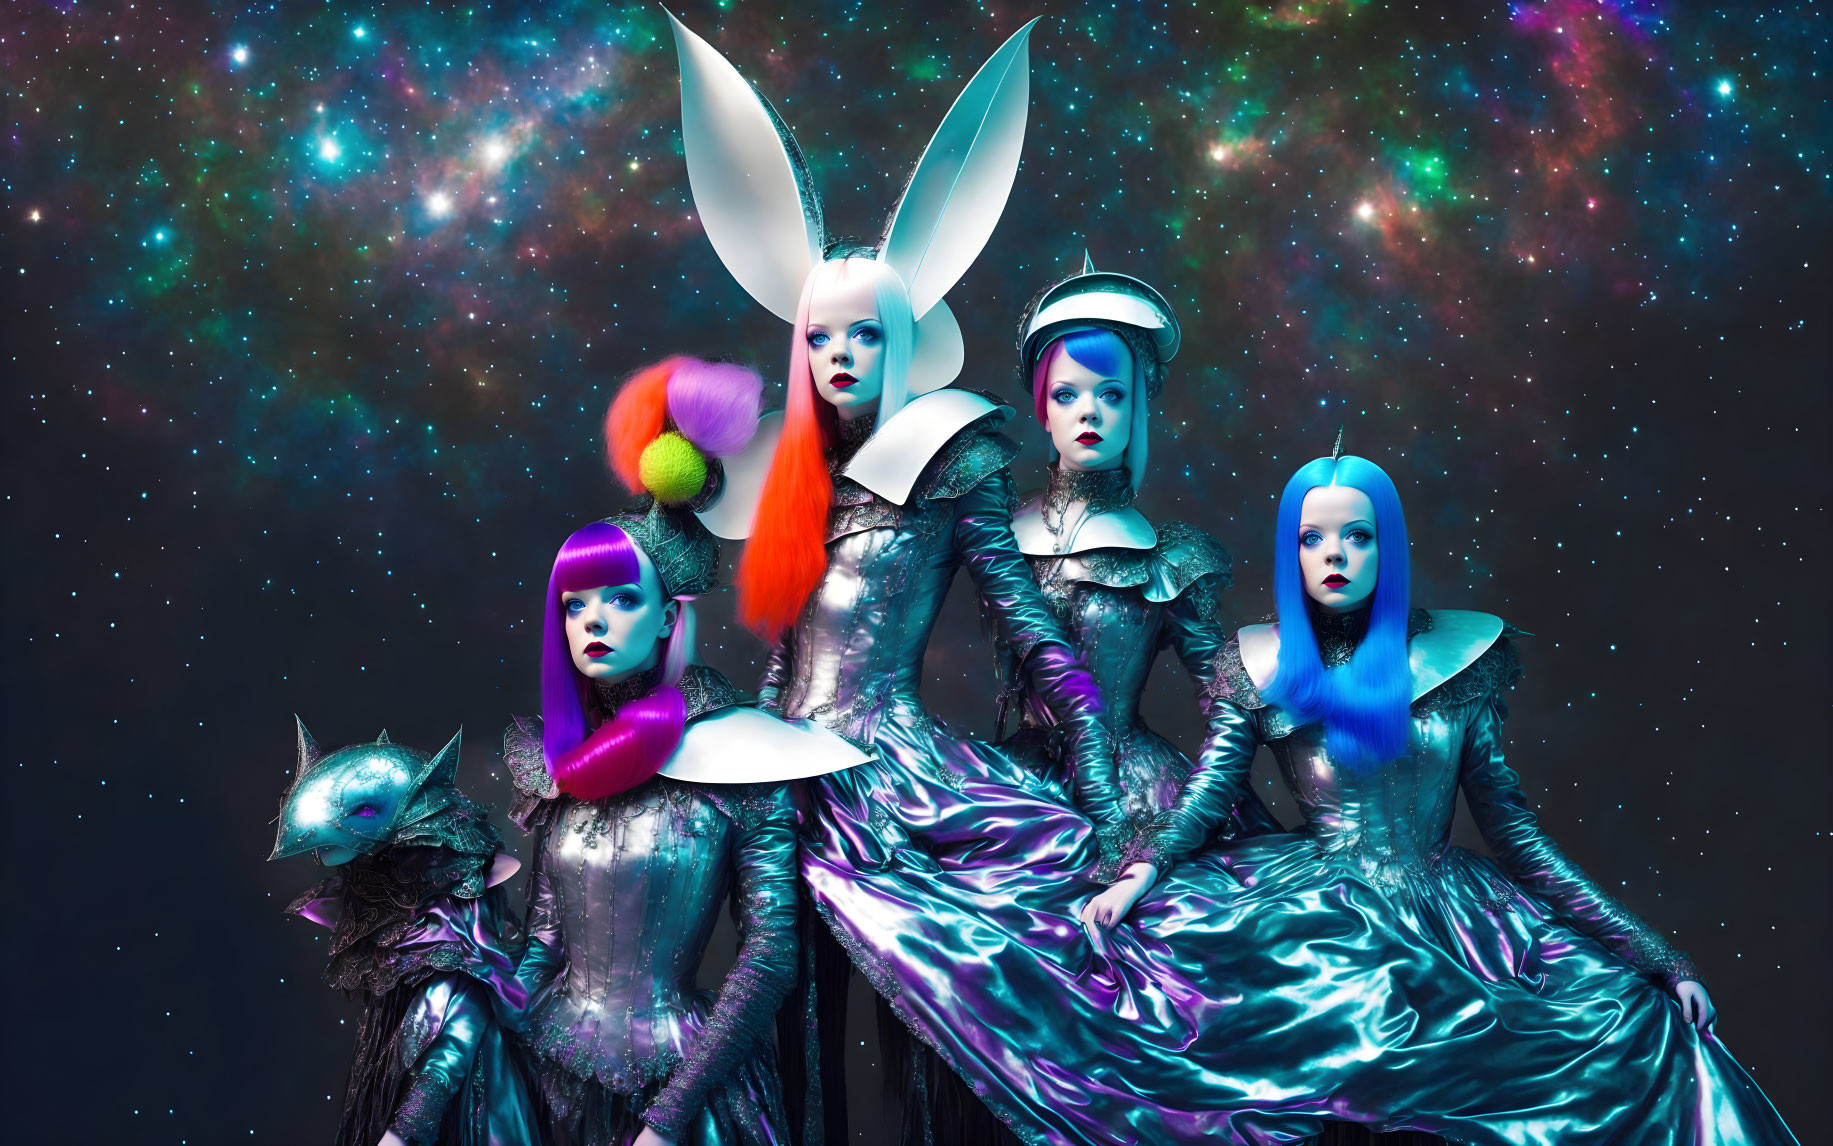 Four models in avant-garde costumes and futuristic hairstyles on a cosmic backdrop